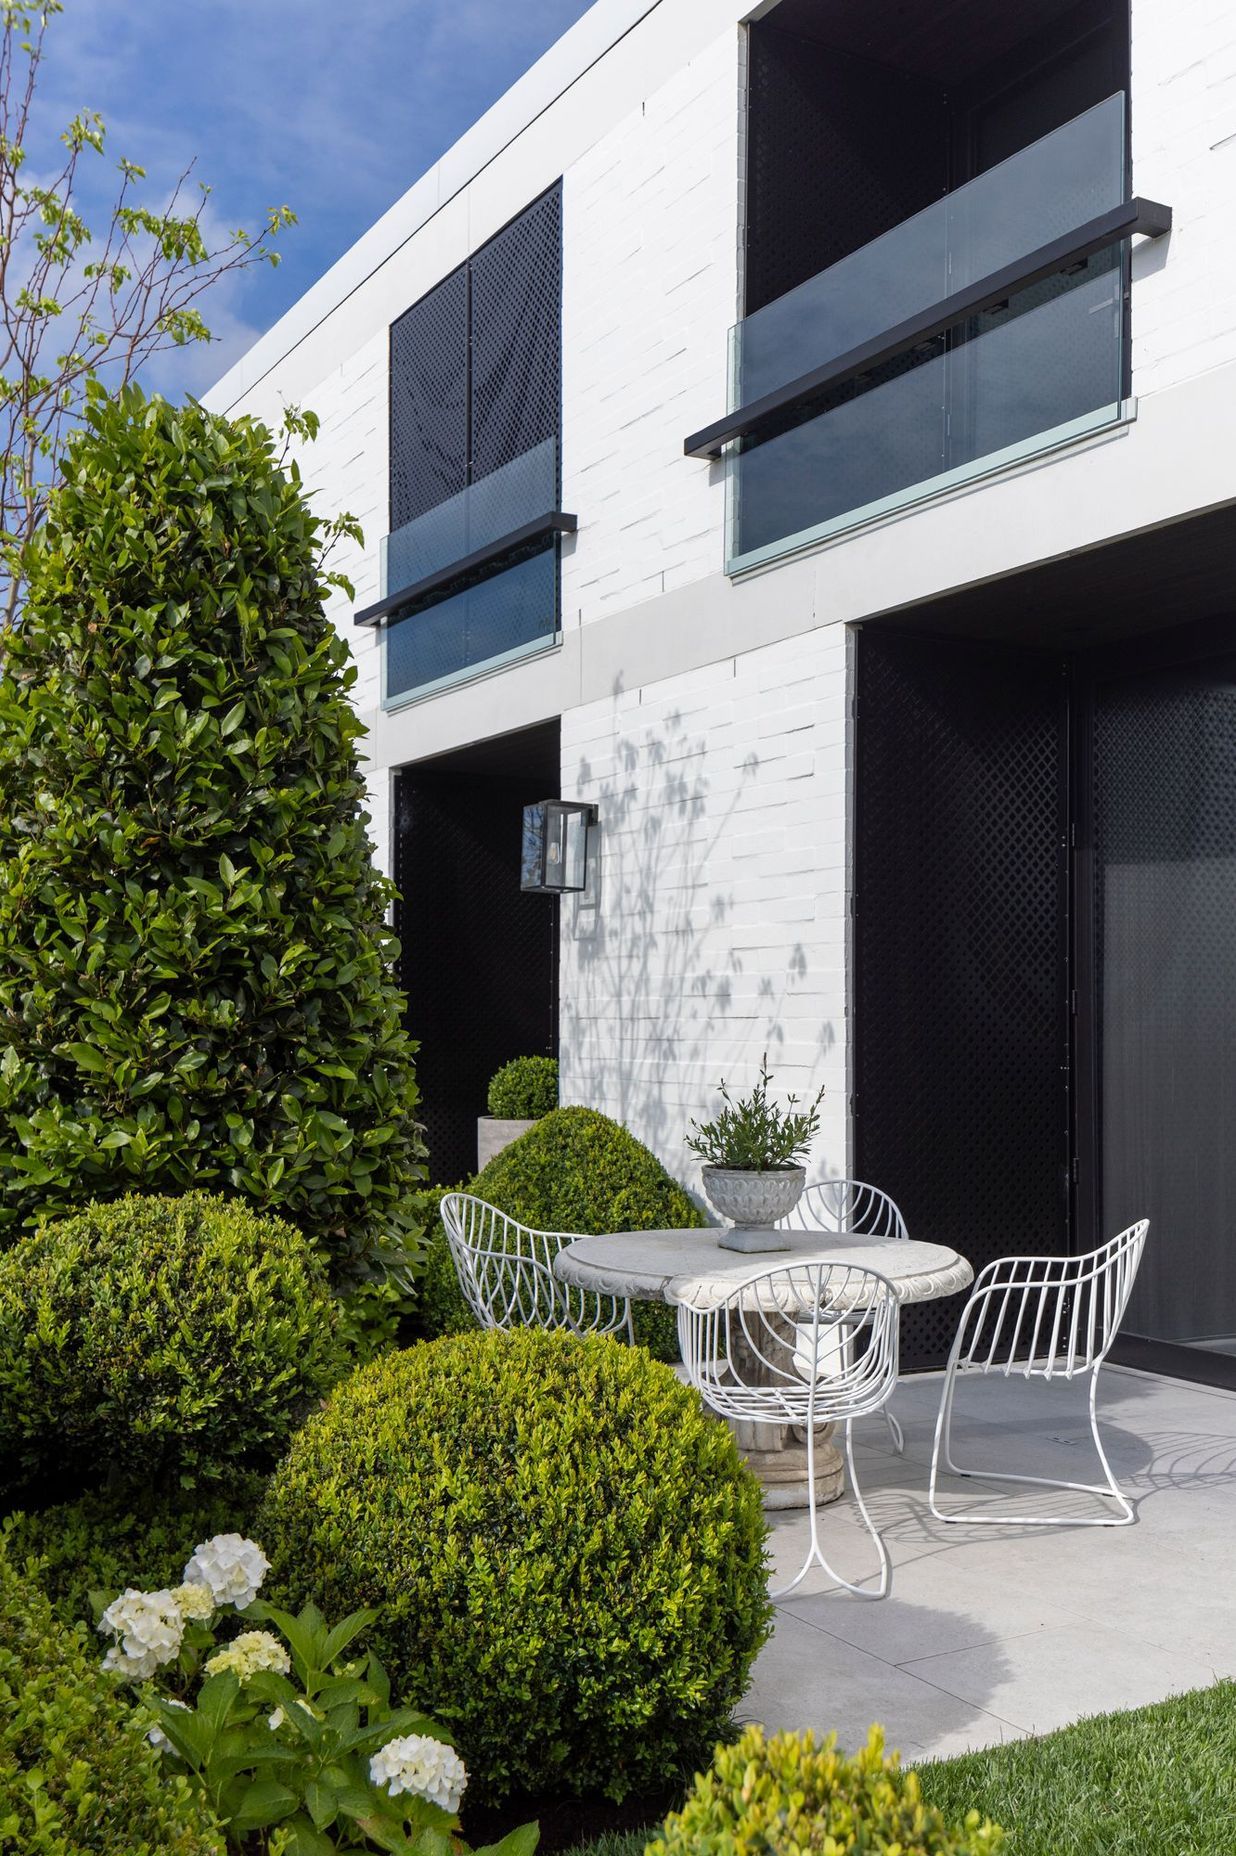 An intimate courtyard is hidden from the road by an abundance of greenery, yet still offers sweeping views of Remuera.